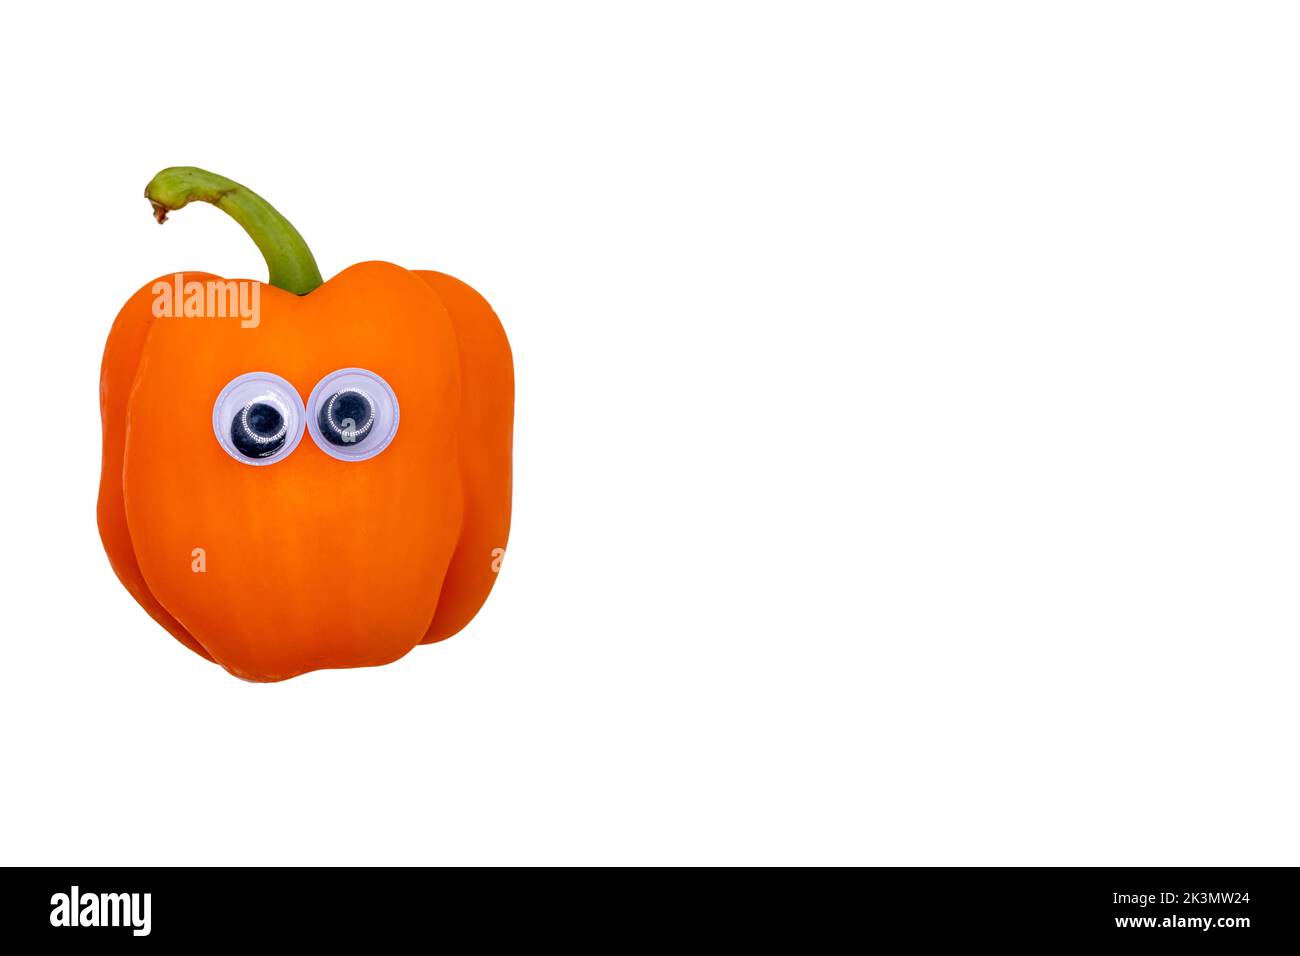 Orange Bell Pepper face with Googly Eyes Stock Photo